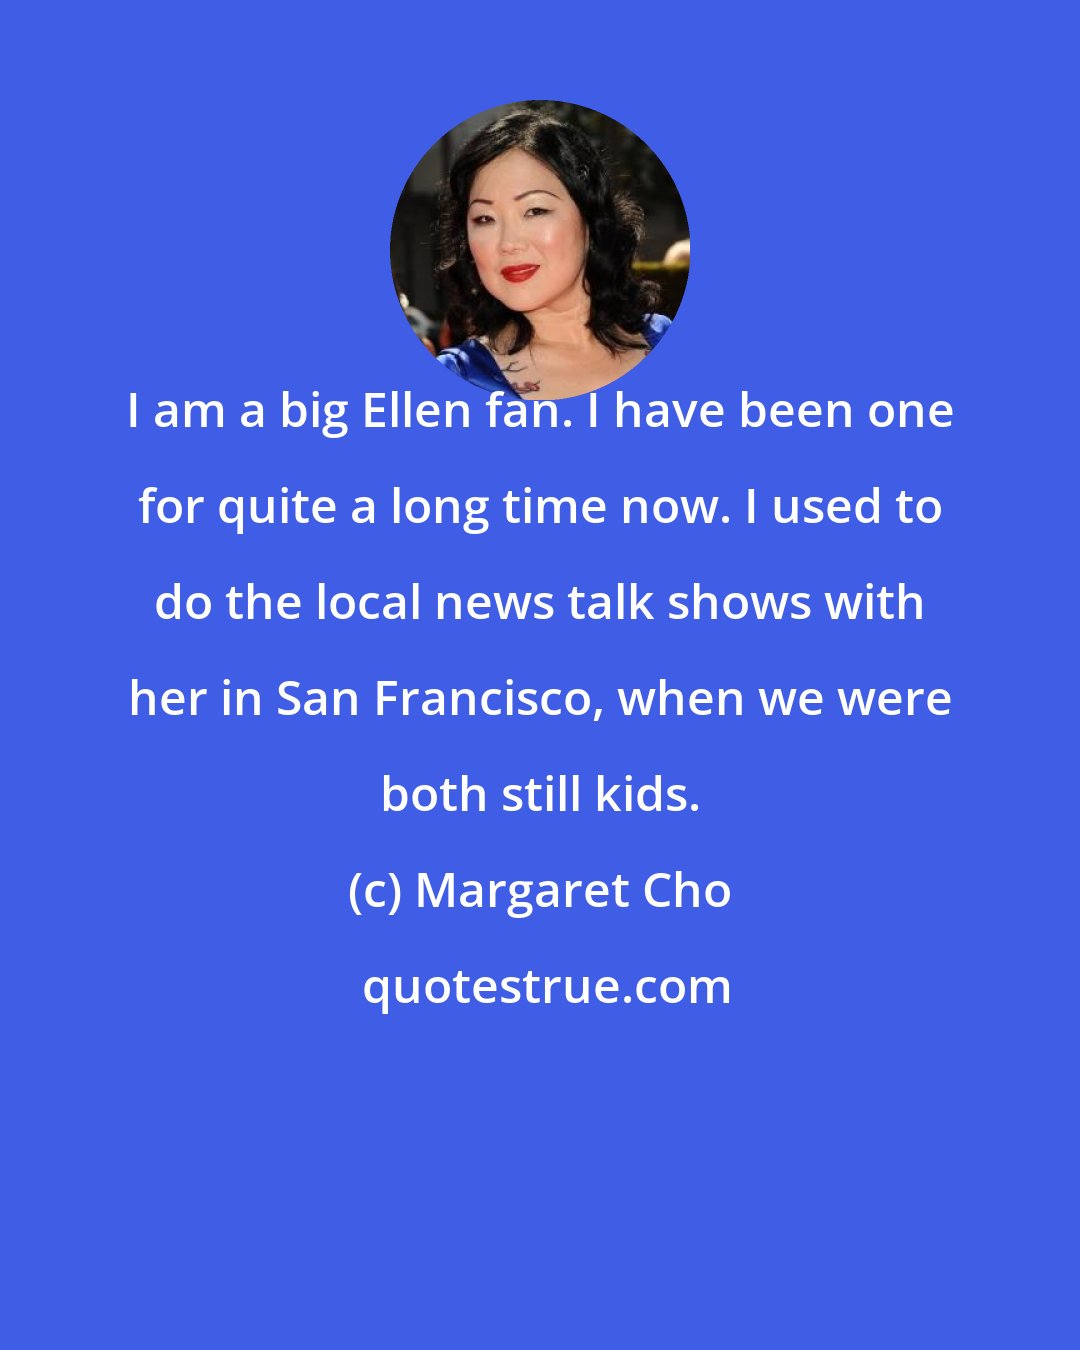 Margaret Cho: I am a big Ellen fan. I have been one for quite a long time now. I used to do the local news talk shows with her in San Francisco, when we were both still kids.